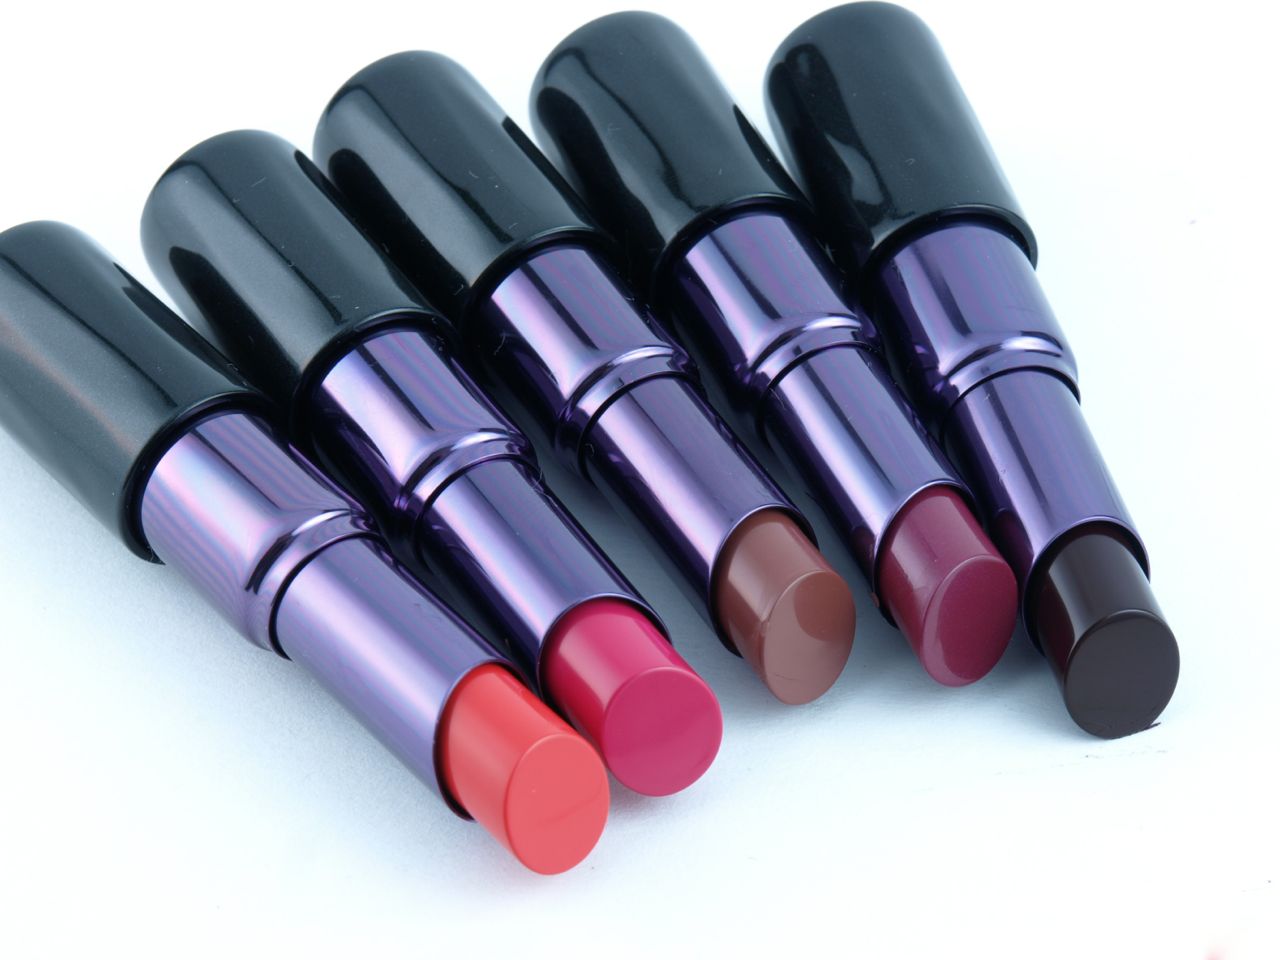 Urban Decay Matte Revolution Lipsticks: Review and Swatches